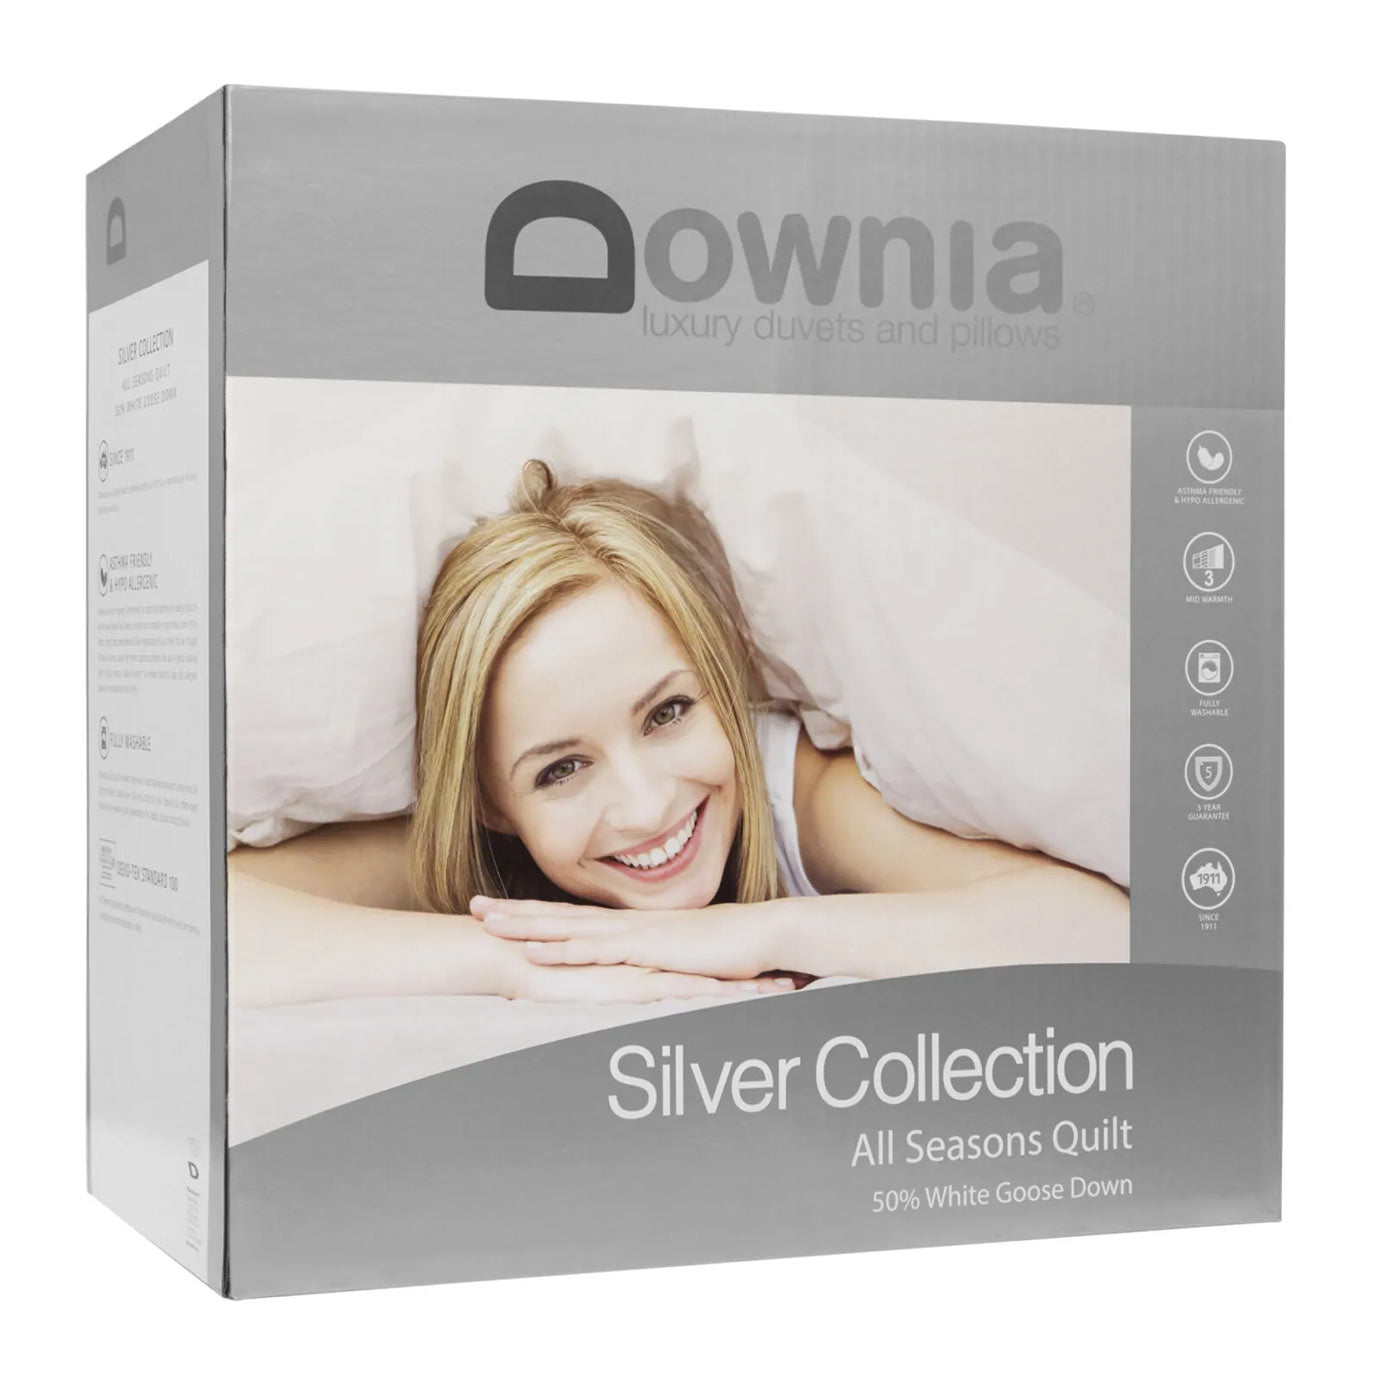 Downia Silver Quilt